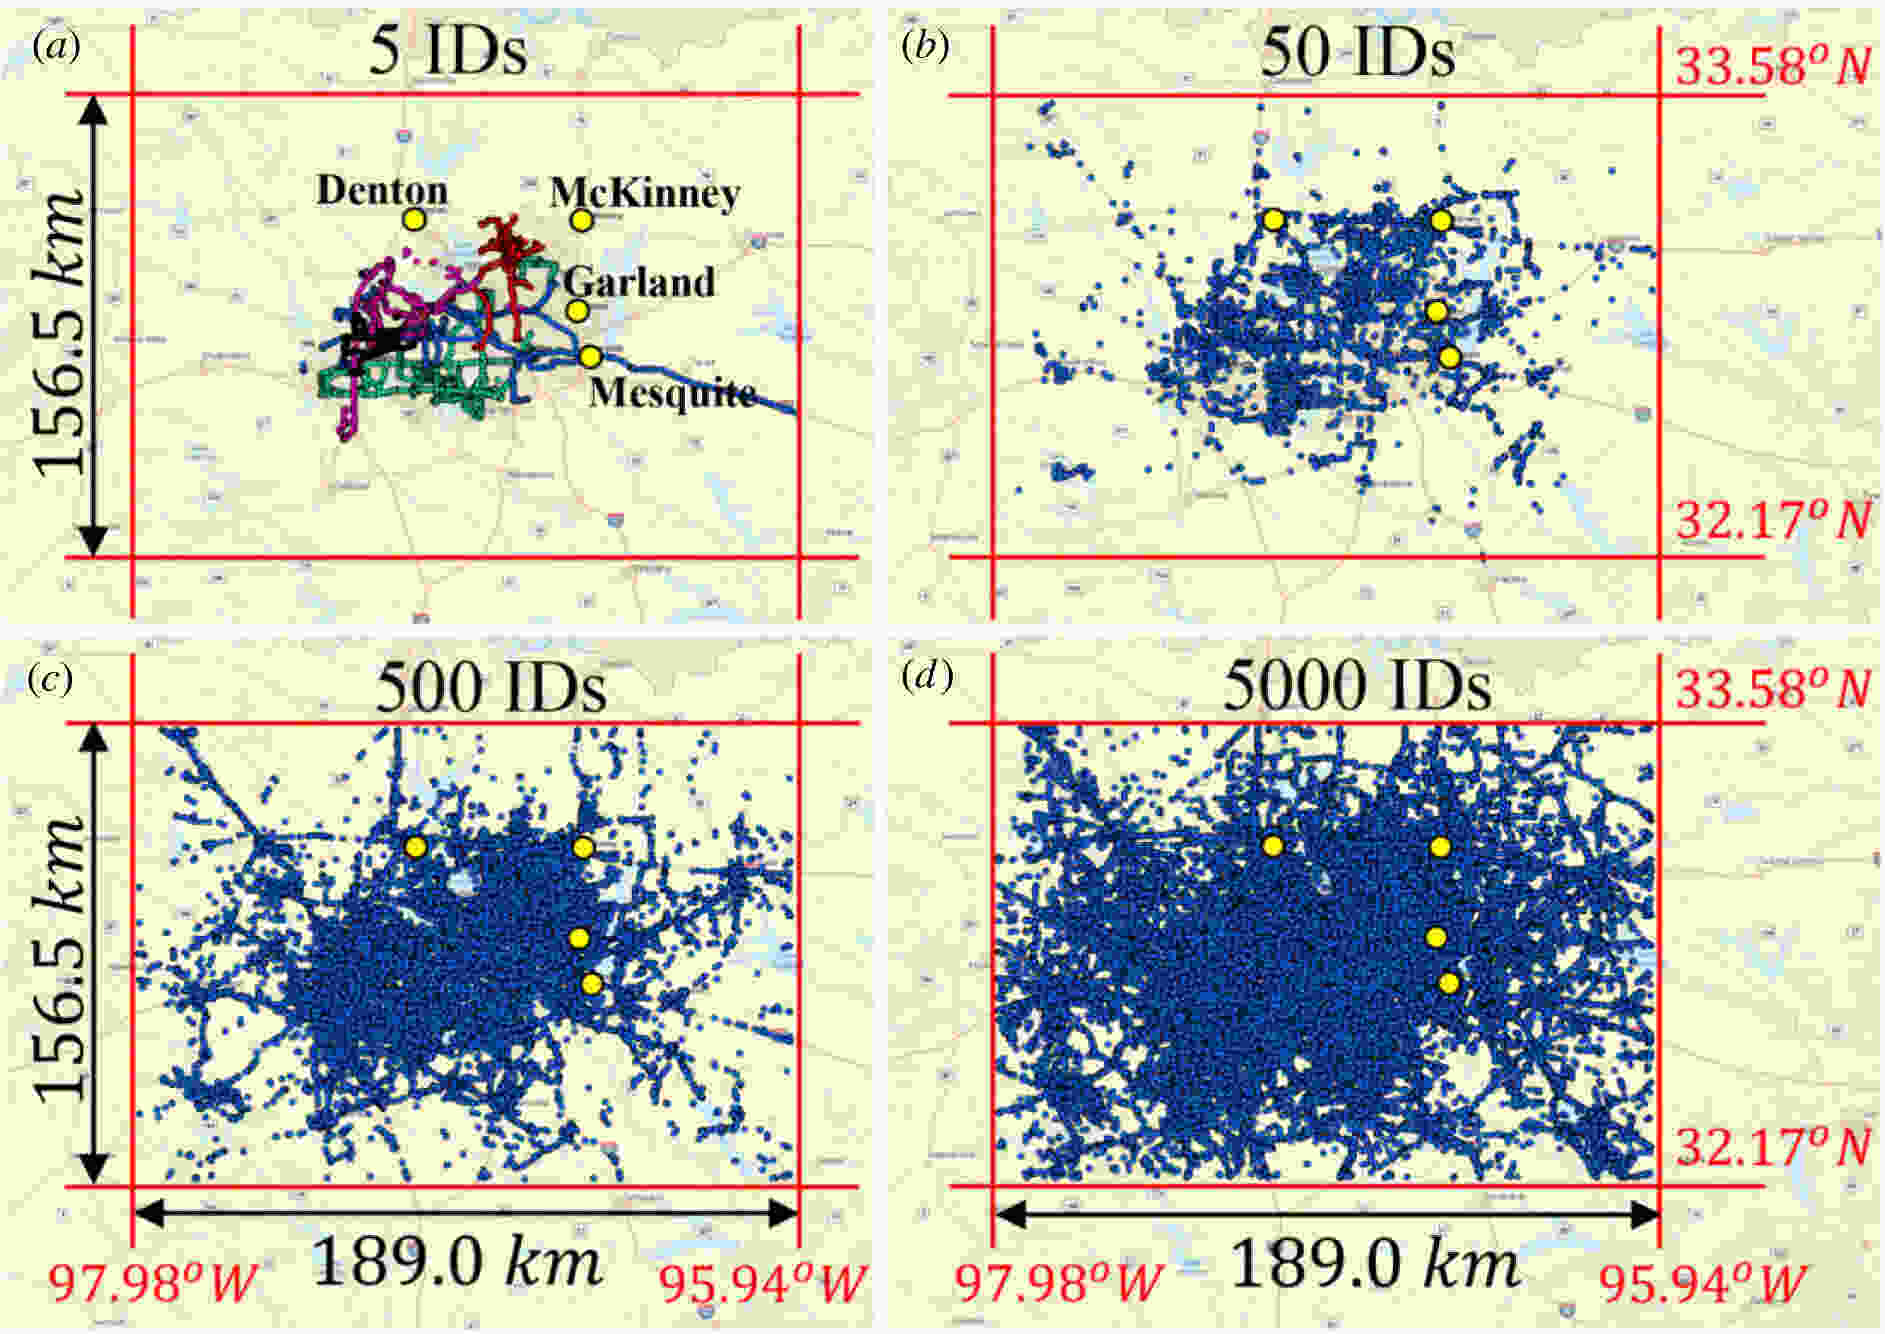 GPS locations of anonymous cell-phone users (IDs) in the greater Dallas metroplex recorded during February and March 2021: (a) 5 IDs; (b) 50 IDs; (c) 500 IDs; (d) 5000 IDs; The yellow dots are nearby cities mentioned in (a). Credit: Royal Society